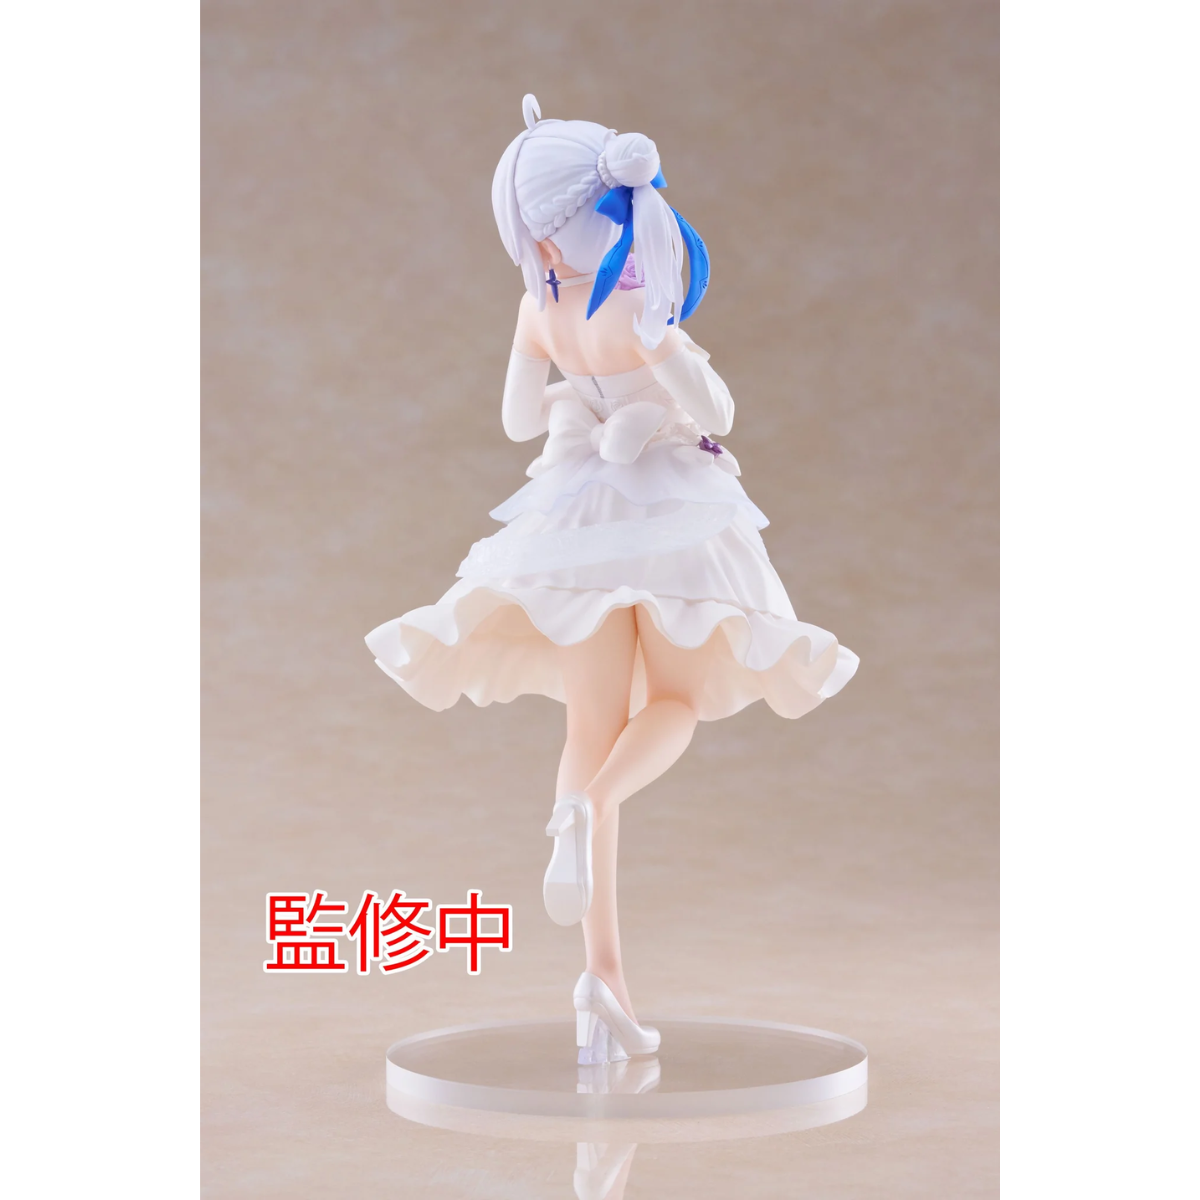 Wandering Witch: The Journey of Elaina Coreful Figure "Elaina" (Dress Ver.)-Taito-Ace Cards & Collectibles